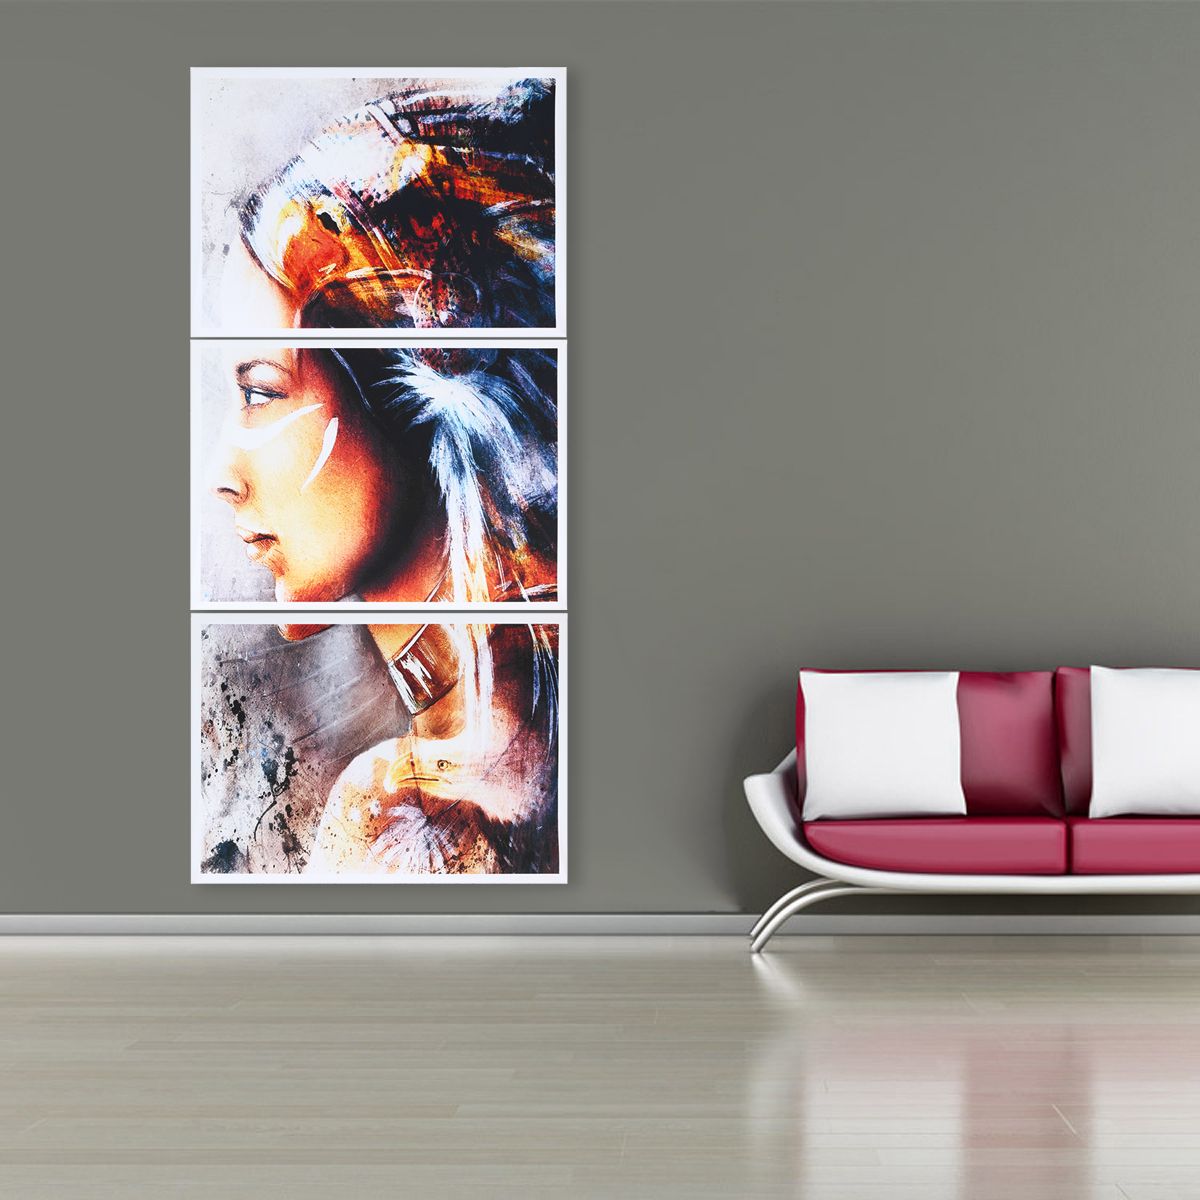 3PcsSet-Modern-Unframed-Canvas-Print-Painting-Poster-Wall-Art-Picture-Home-Decorations-1464482